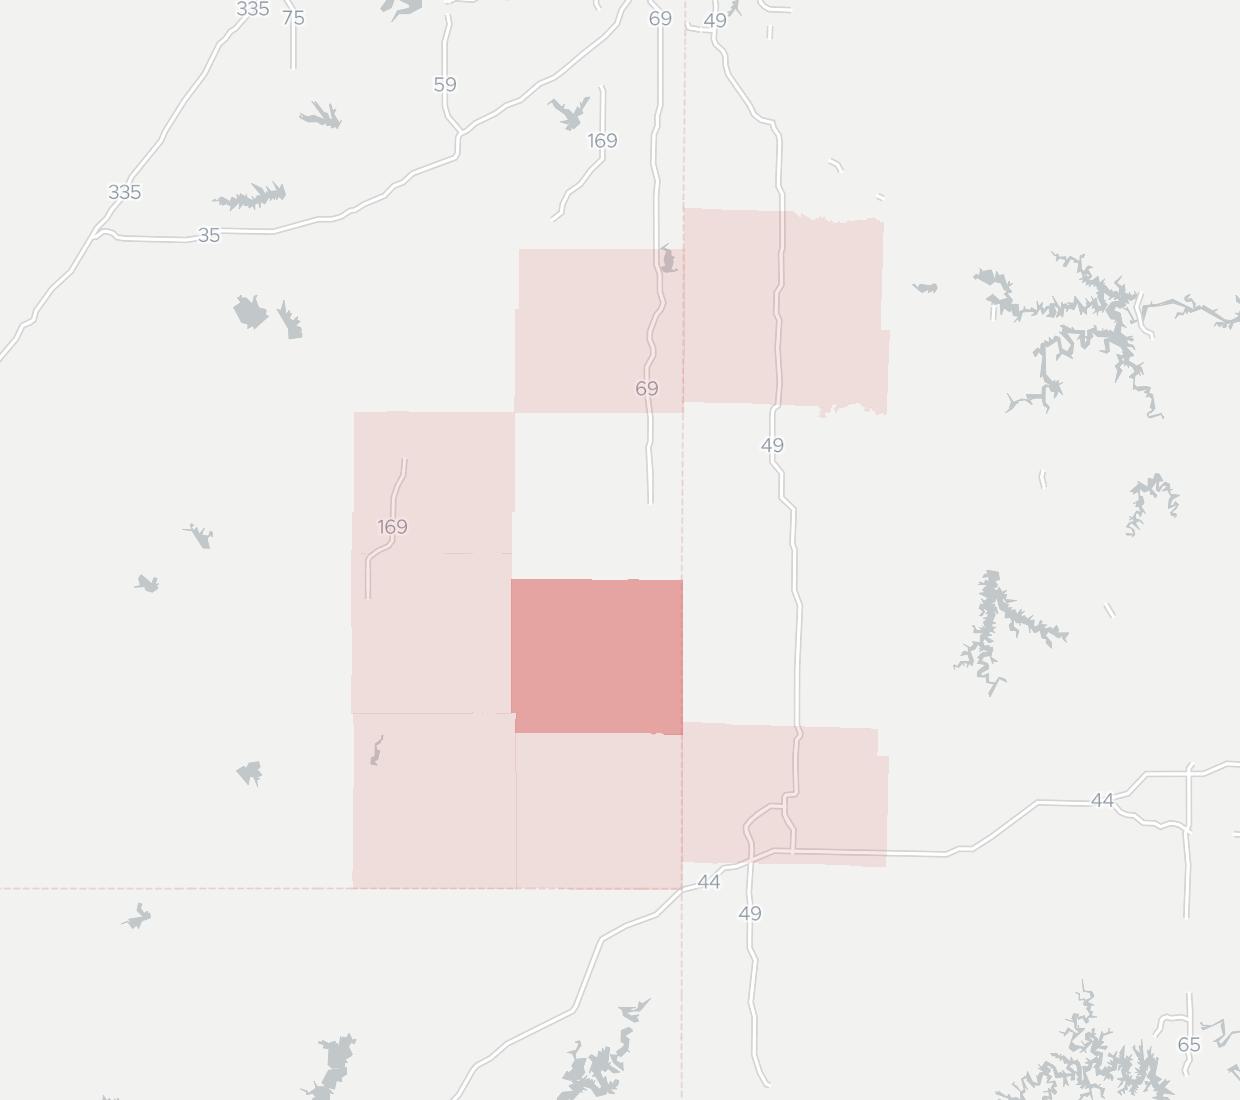 Craw-Kan Telephone Cooperative Coverage Map